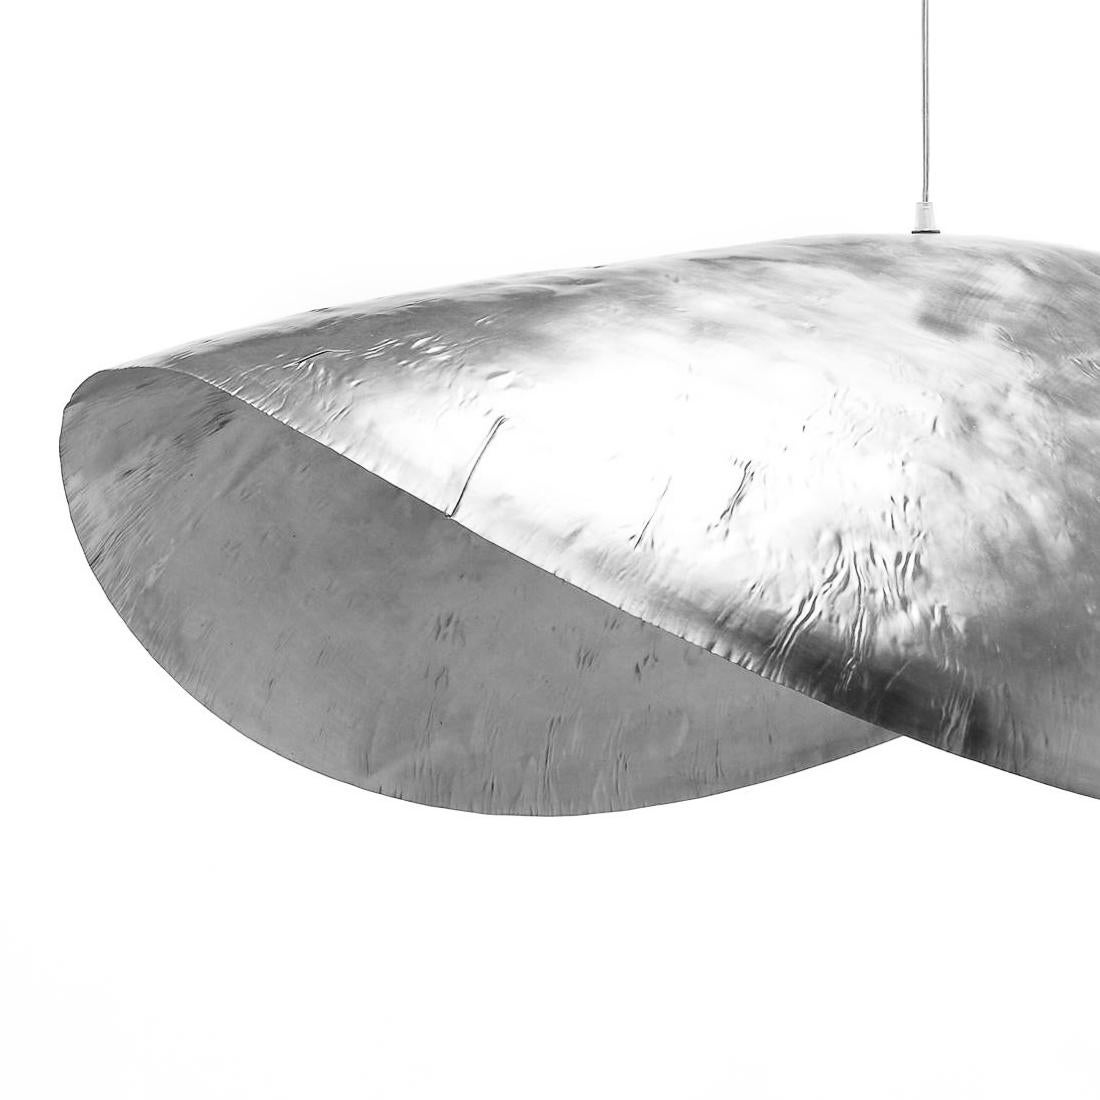 Suspension leaf silver large all in nickeled
solid brass. Flexible piece. 1 bulb, lamp holder
type E27, Max 18 Watt. 220 Voltage.
L 120 x D 65 x H 42cm. Electric cable in 250cm and
steel cable in 200cm. Price: 1690,00€.